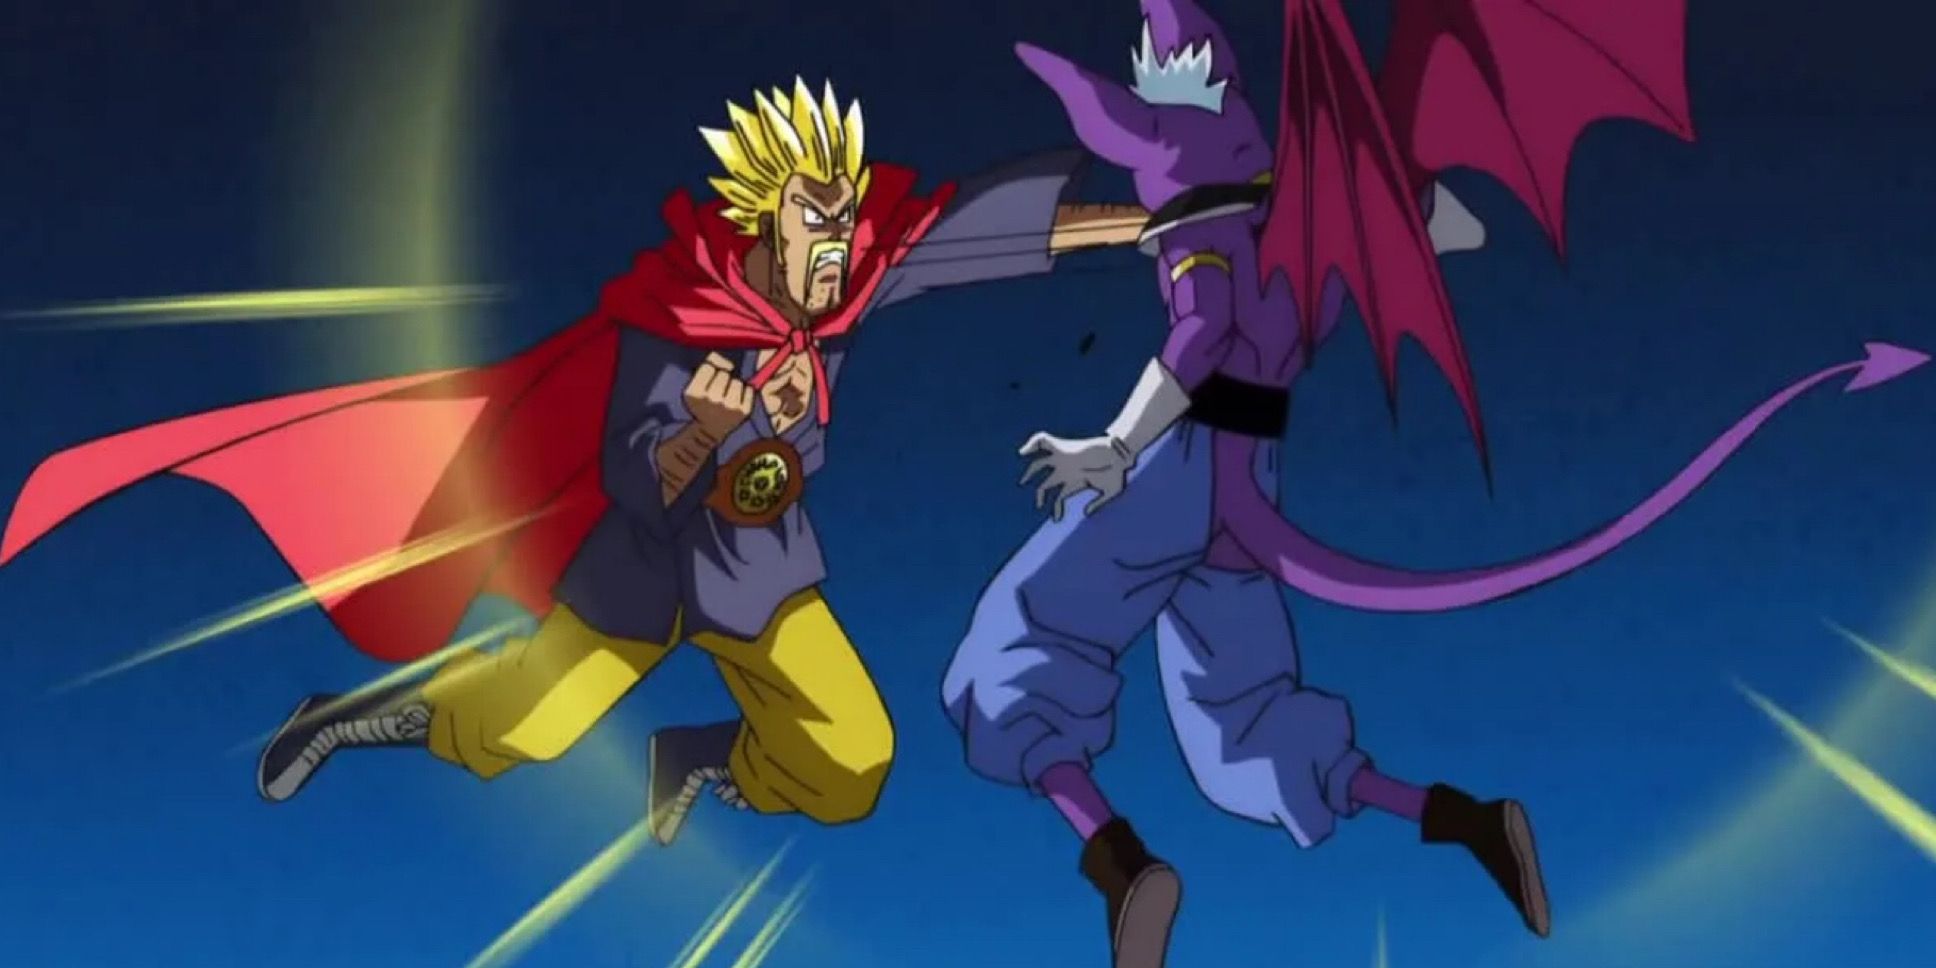 Super Saiyan Hercule fights Beerus in an exaggerated version of events in Dragon Ball Super